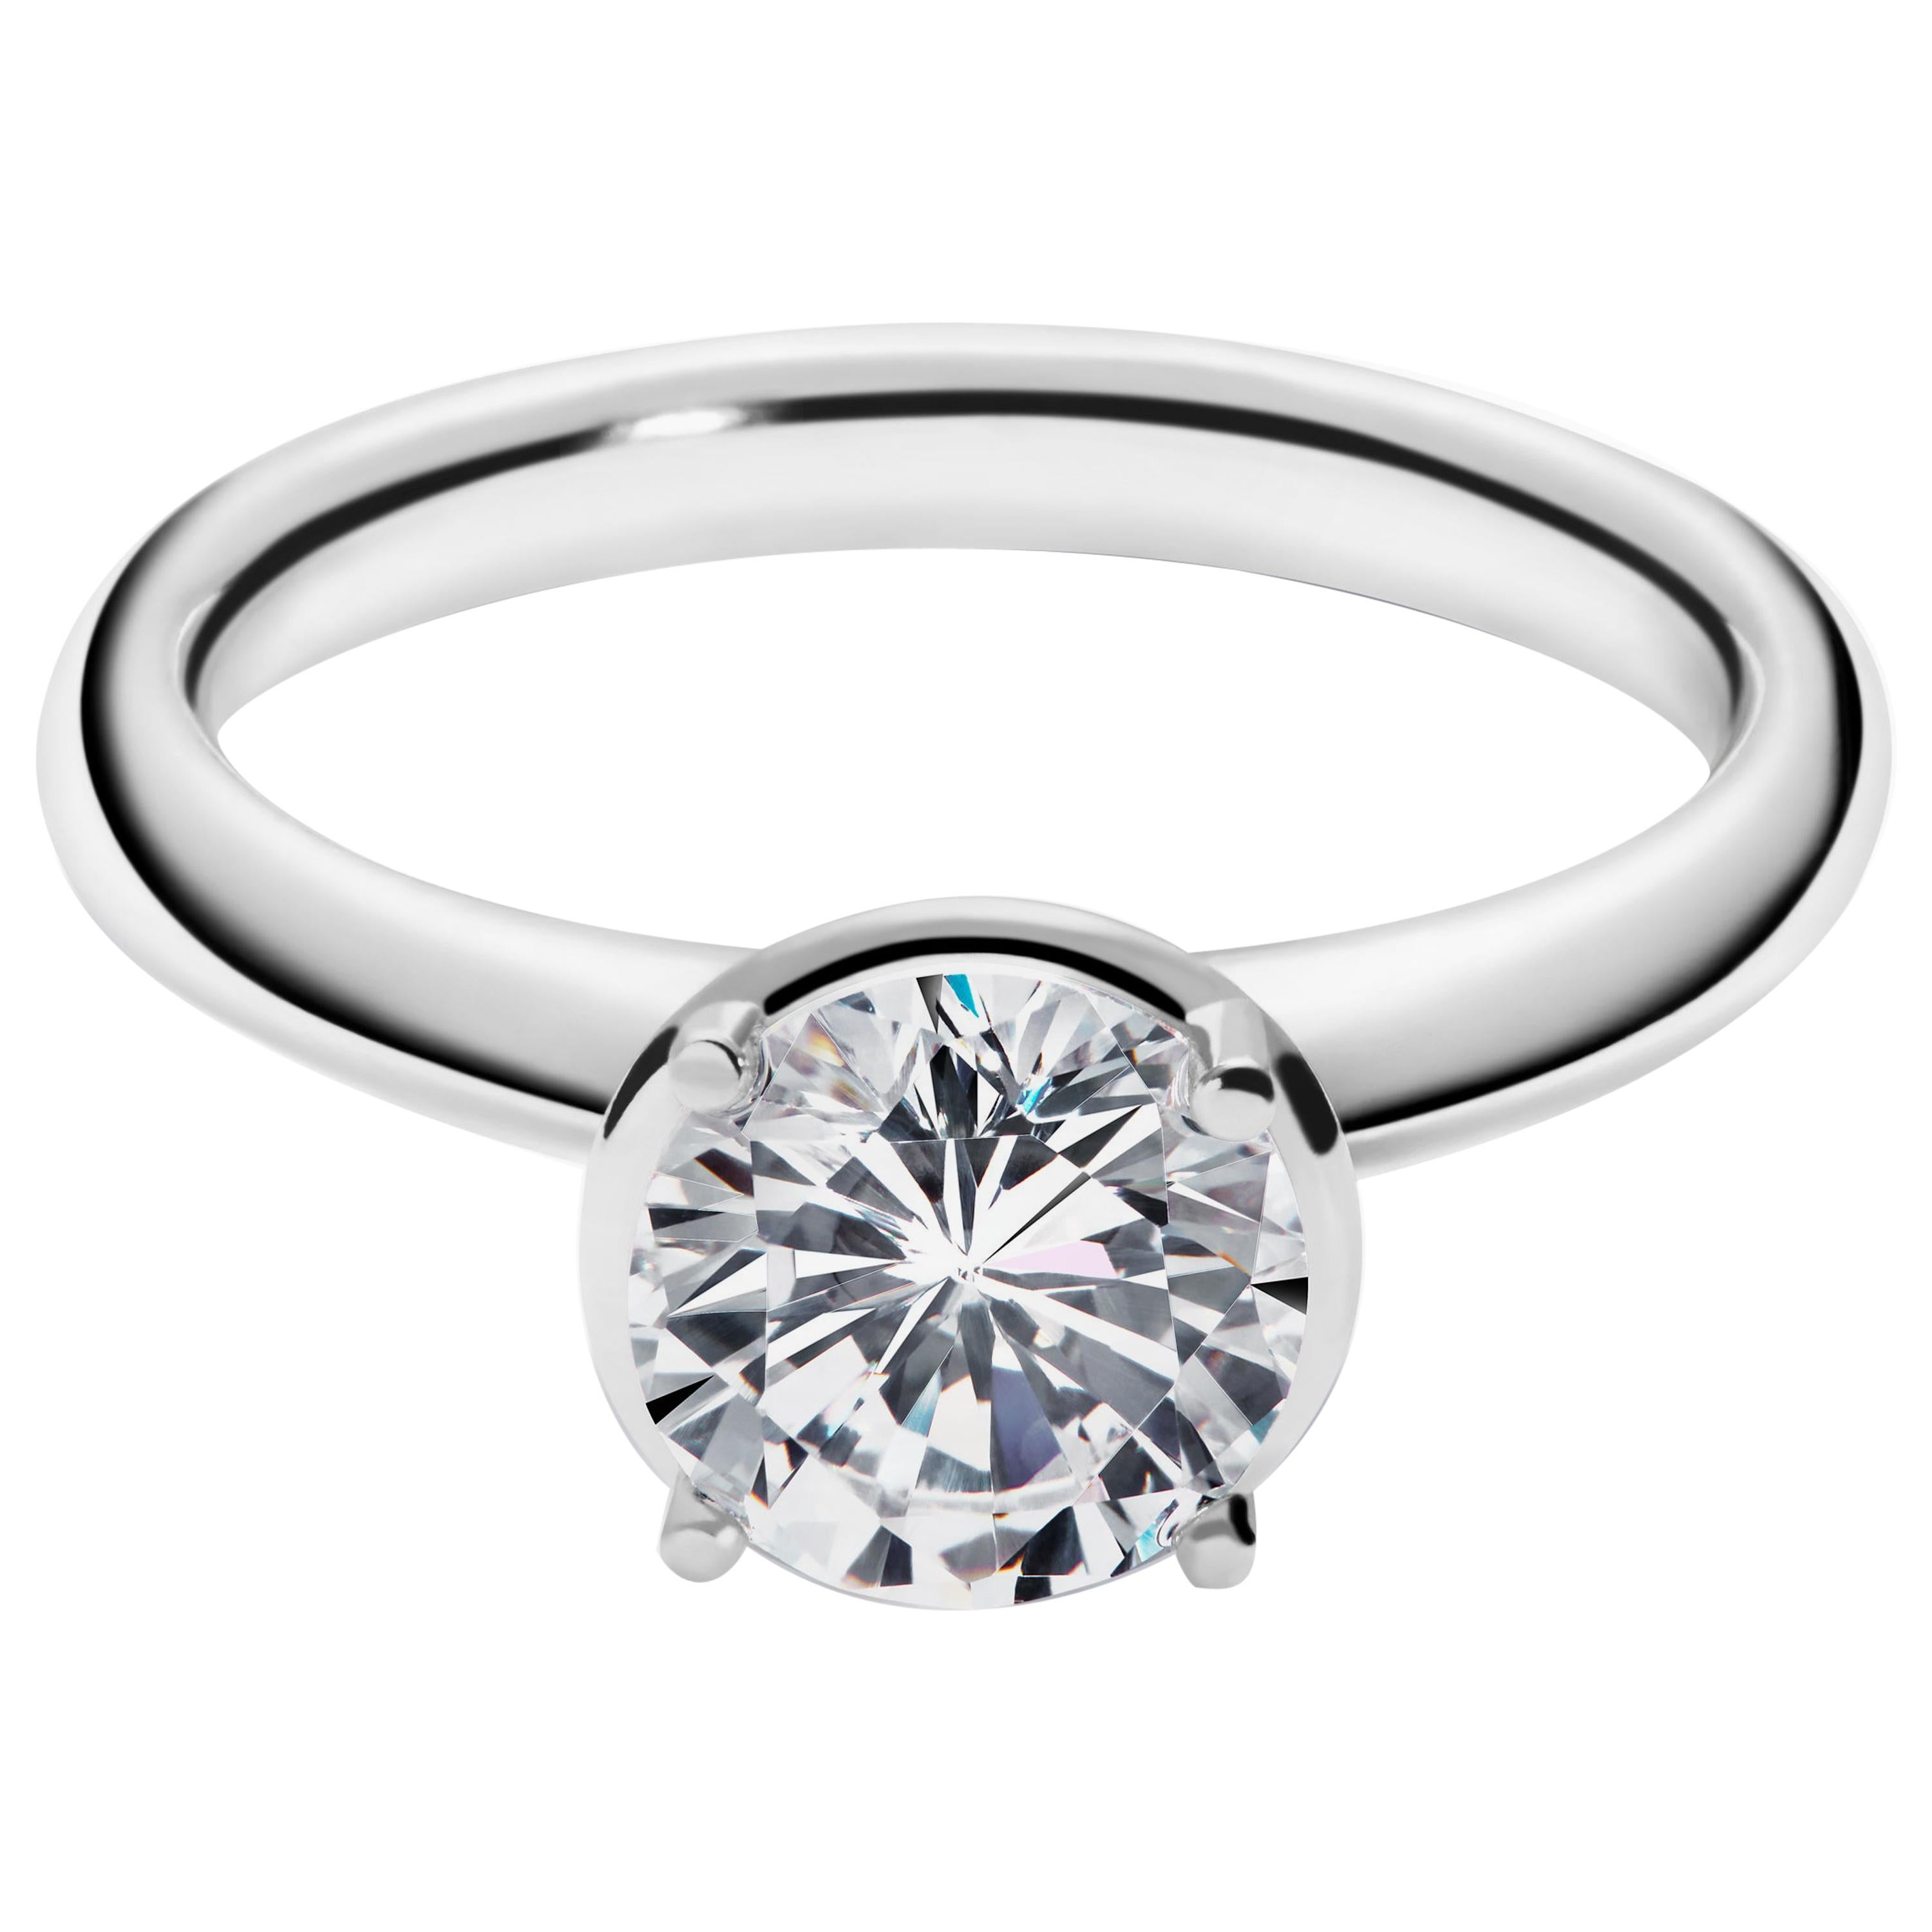 1.5 Carat Solitaire Traceable Diamond Ring in White Gold by Rocks for Life For Sale